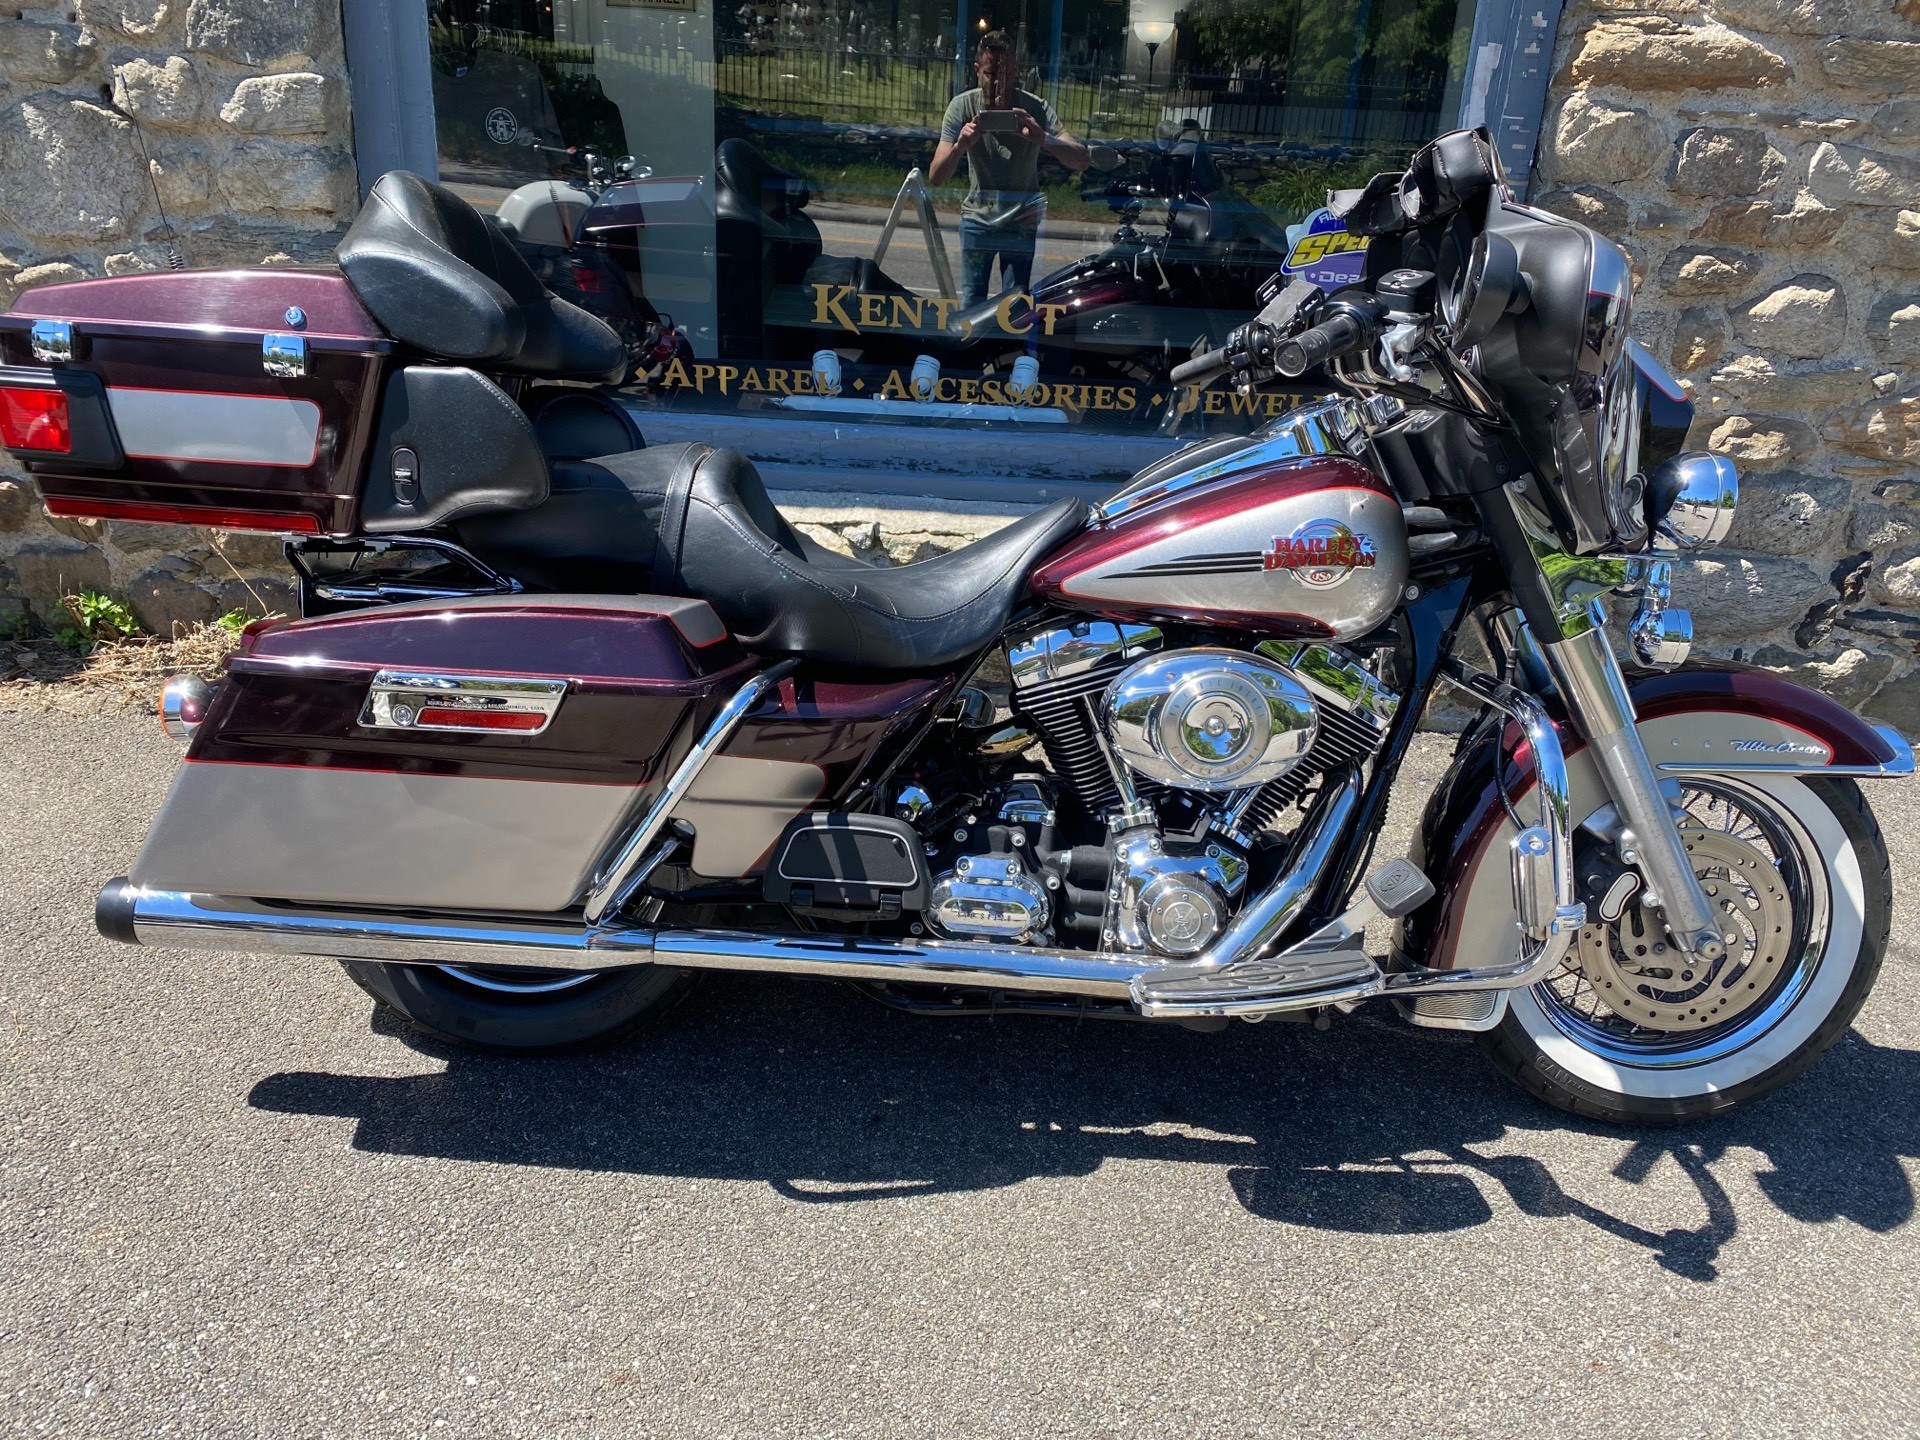 Used 2007 Harley Davidson Ultra Classic Electra Glide Motorcycles In Kent Ct C601032 Two Tone Burgundy Creme Silver